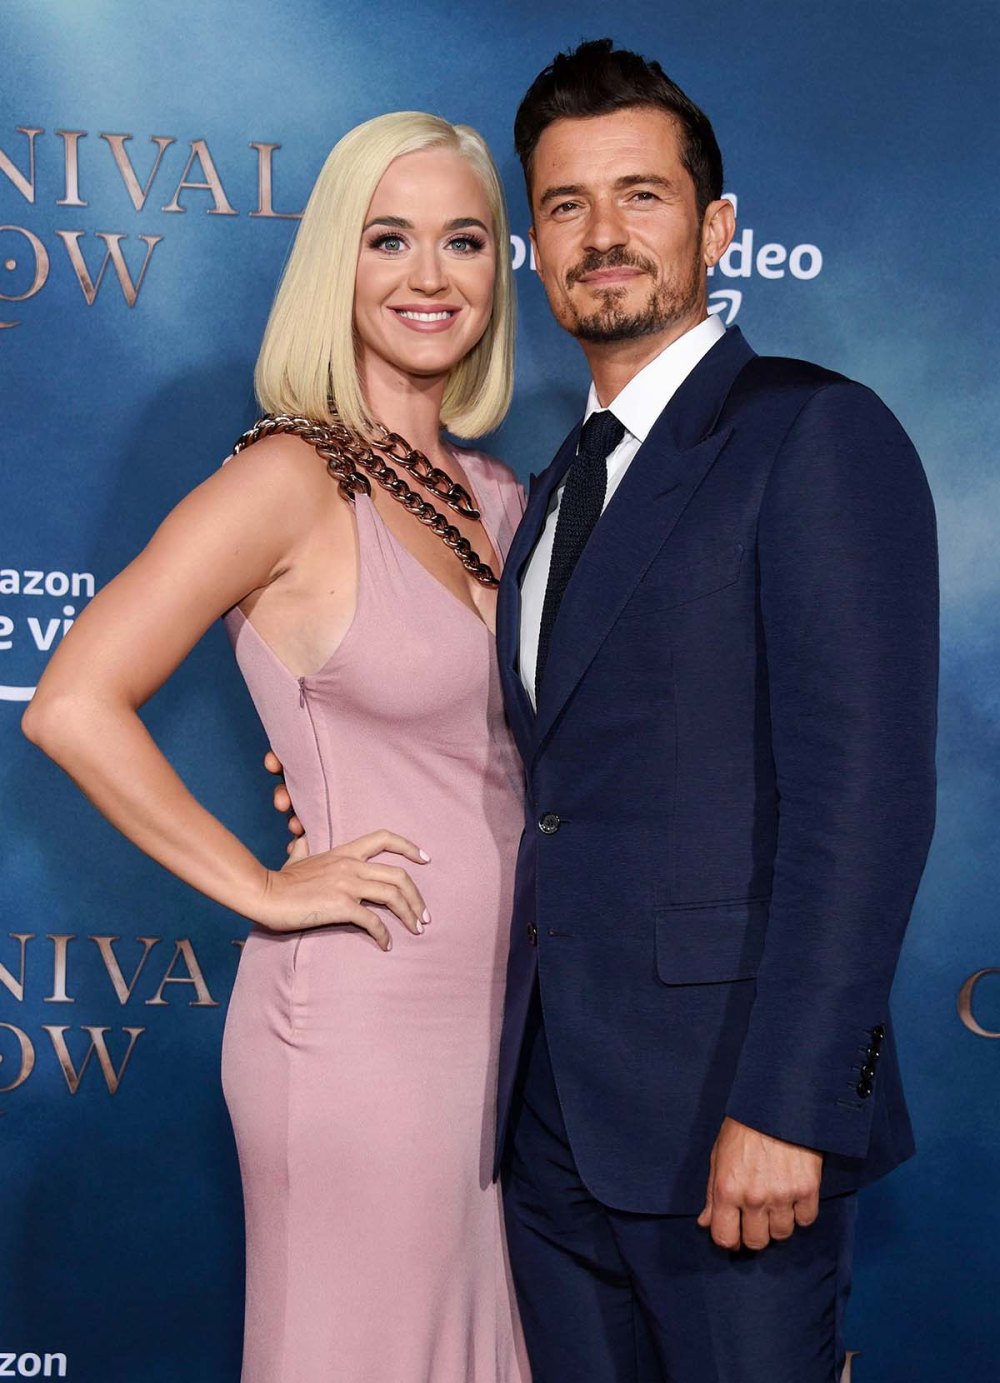 Orlando Bloom Gets Candid About Challenges in Katy Perry Relationship